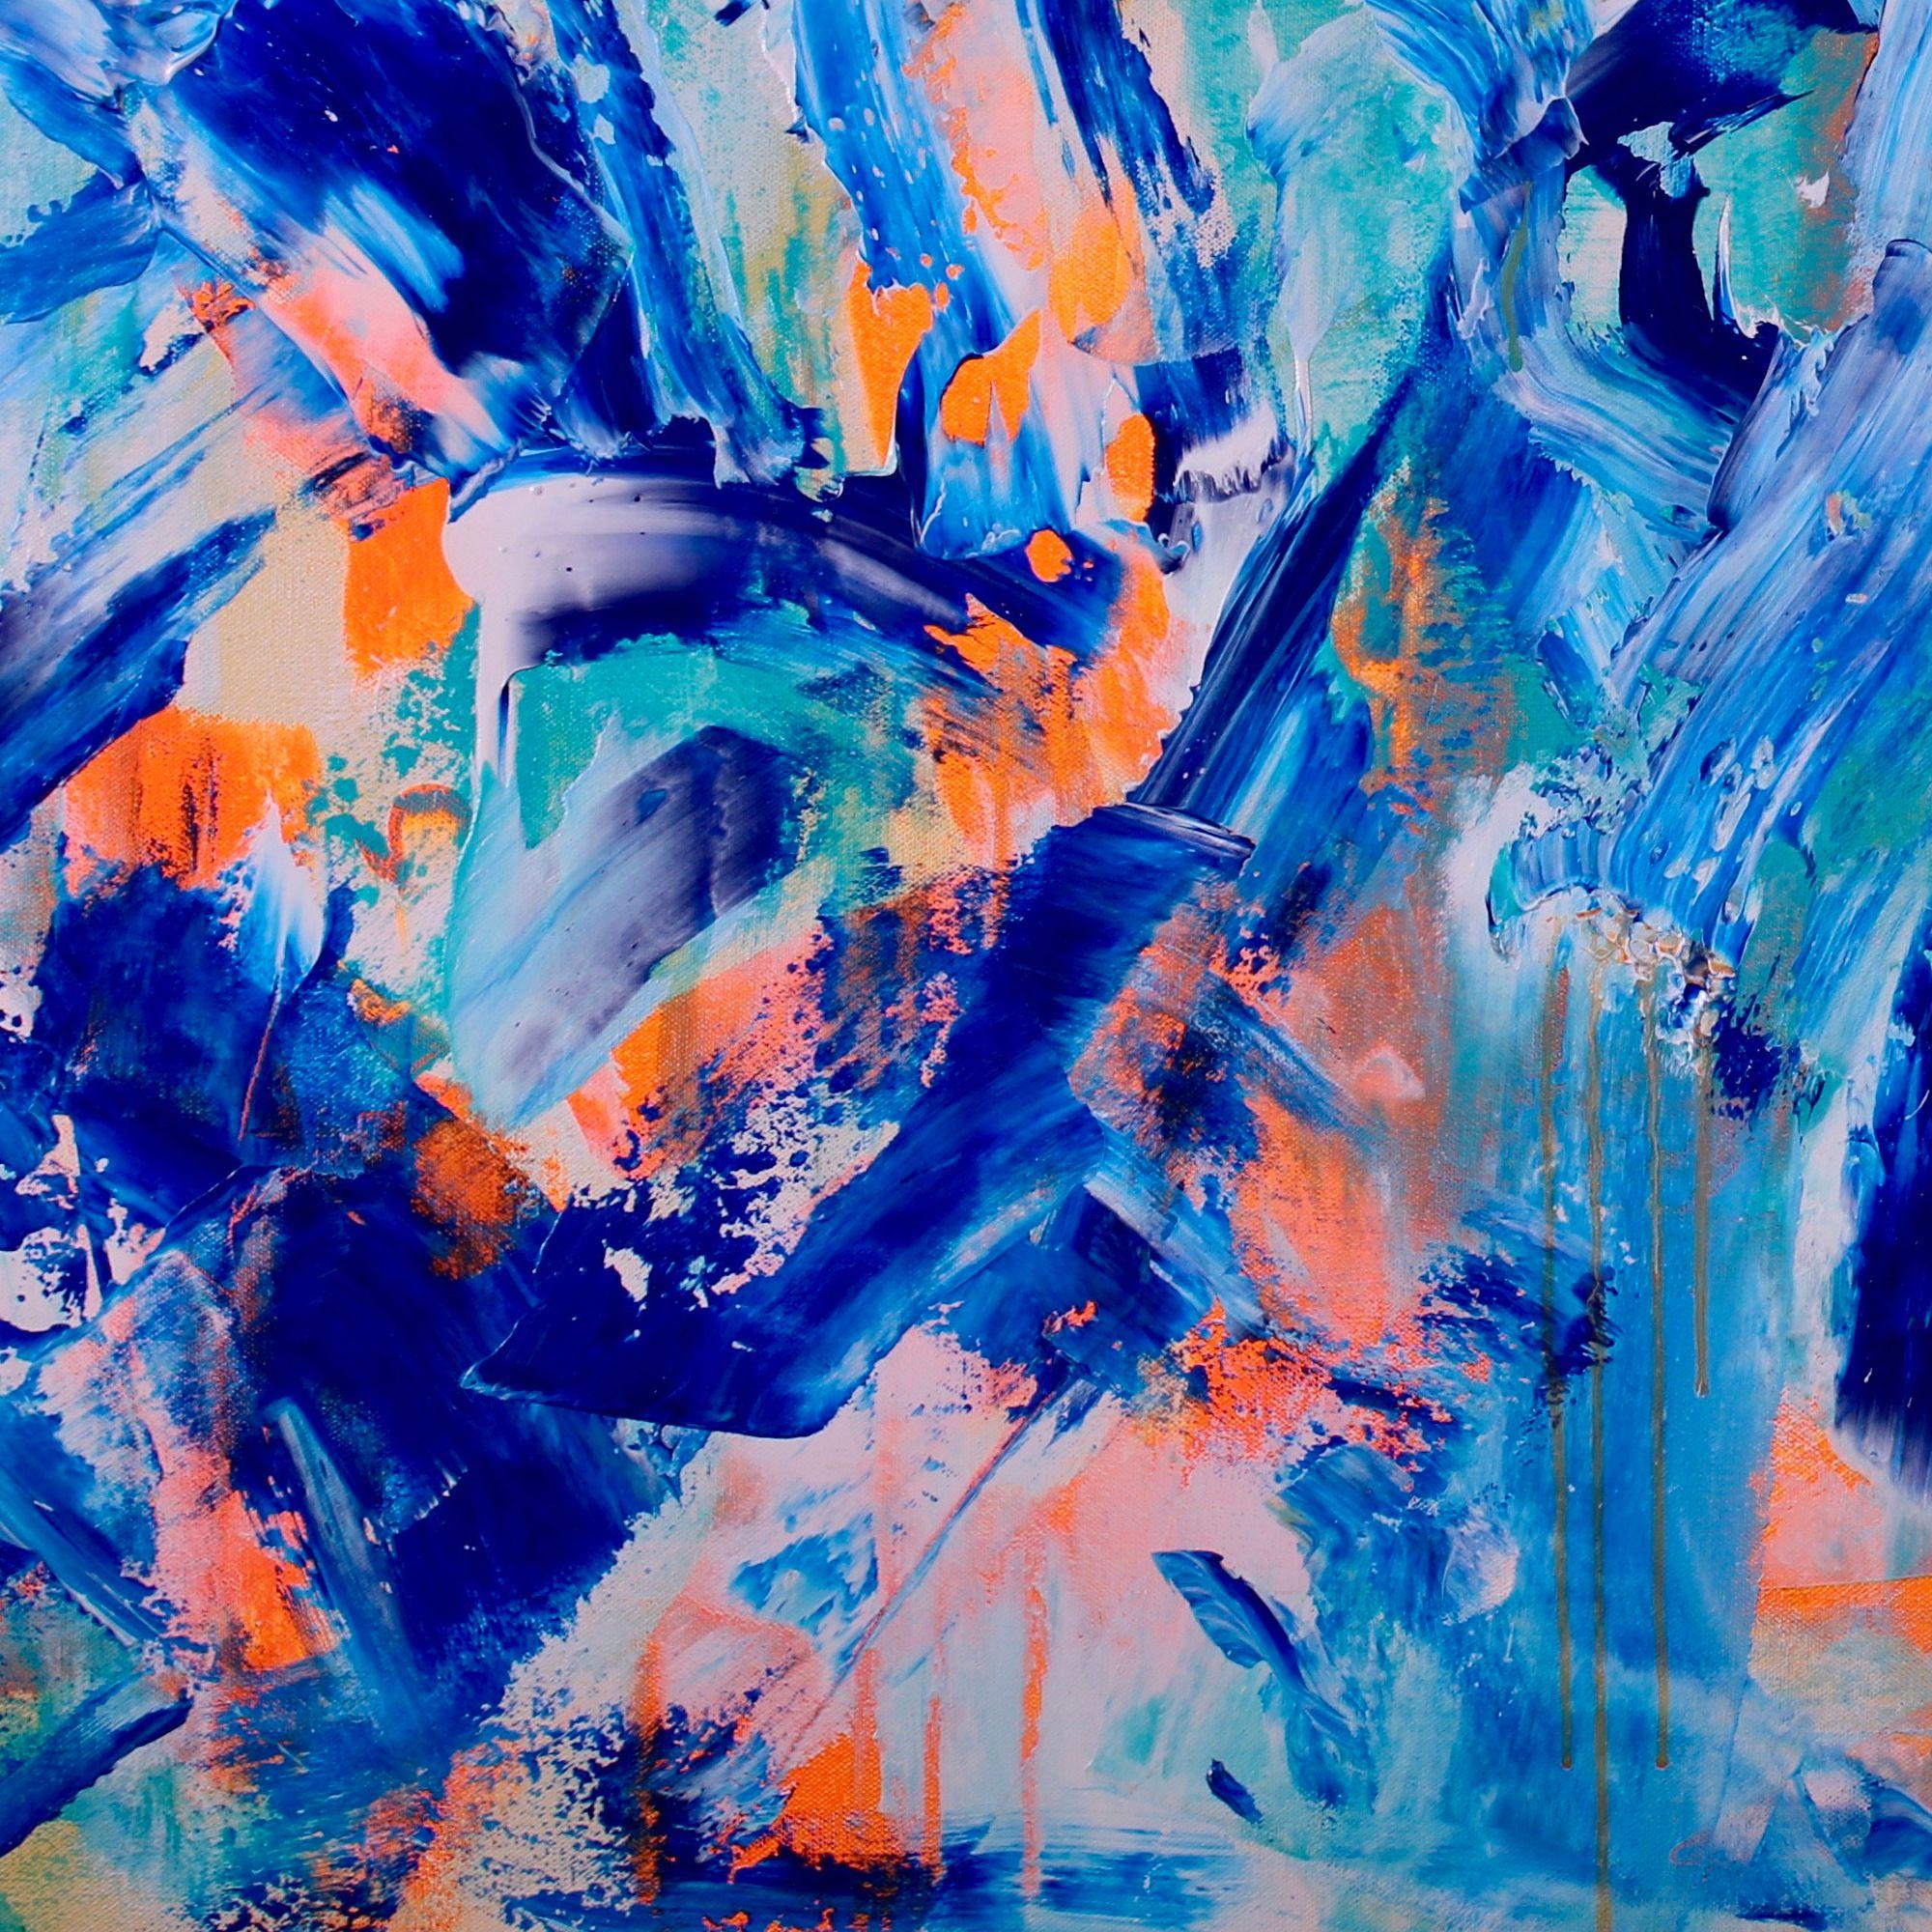 ORIGINAL FINE ABSTRACT - DYNAMIC AND CONTEMPLATIVE!     Mainly two colors, blue and bright orange. Painted by segments to make more contrast and depth. Lot of motion gloss finish! Beautiful, dynamic contemplative painting.     I only make original